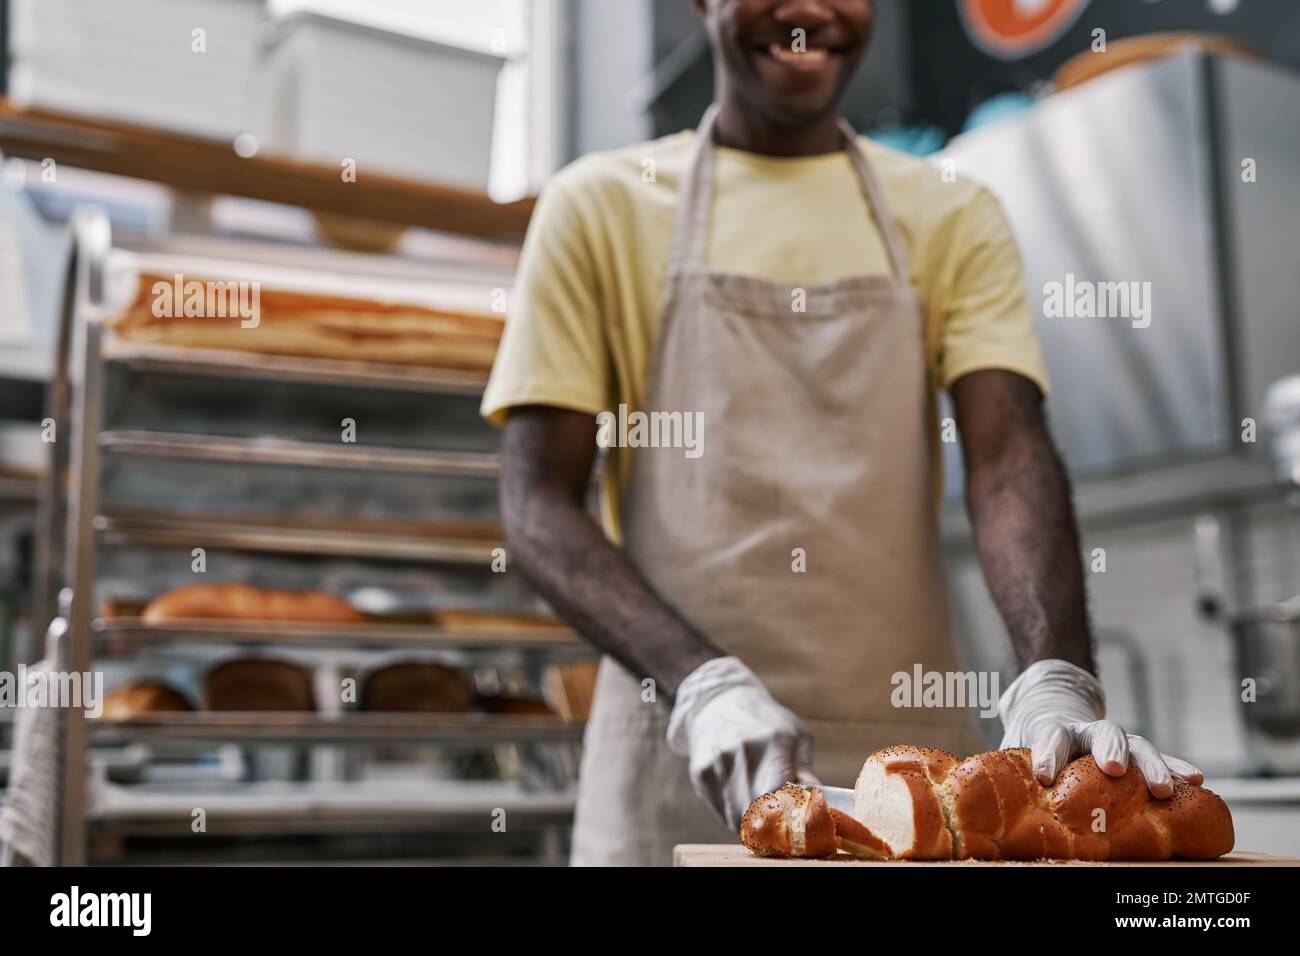 Smiling baker cutting braided bread with poppy seeds for customer Stock Photo